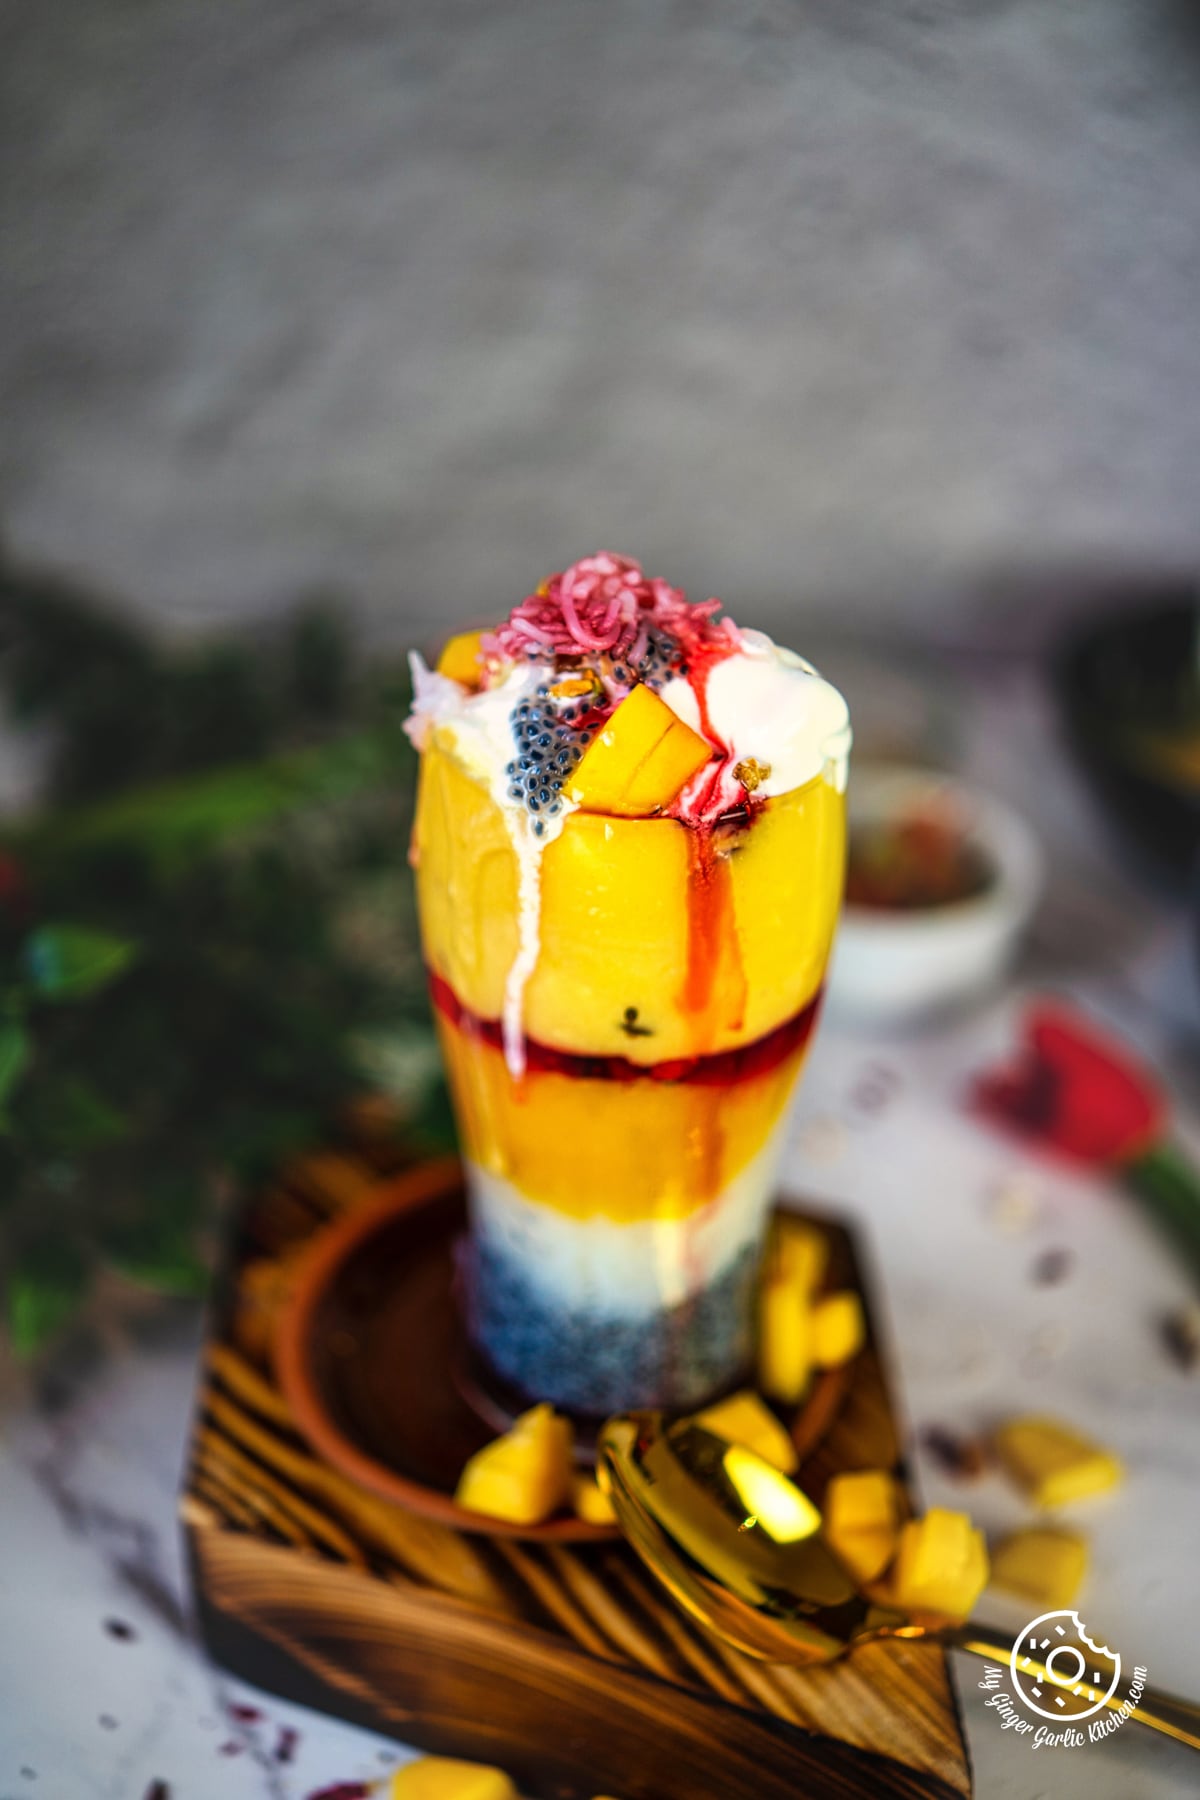 photo of a mango falooda dessert garnished with fruits and ice cream on a wooden tray with a golden spoon on the side